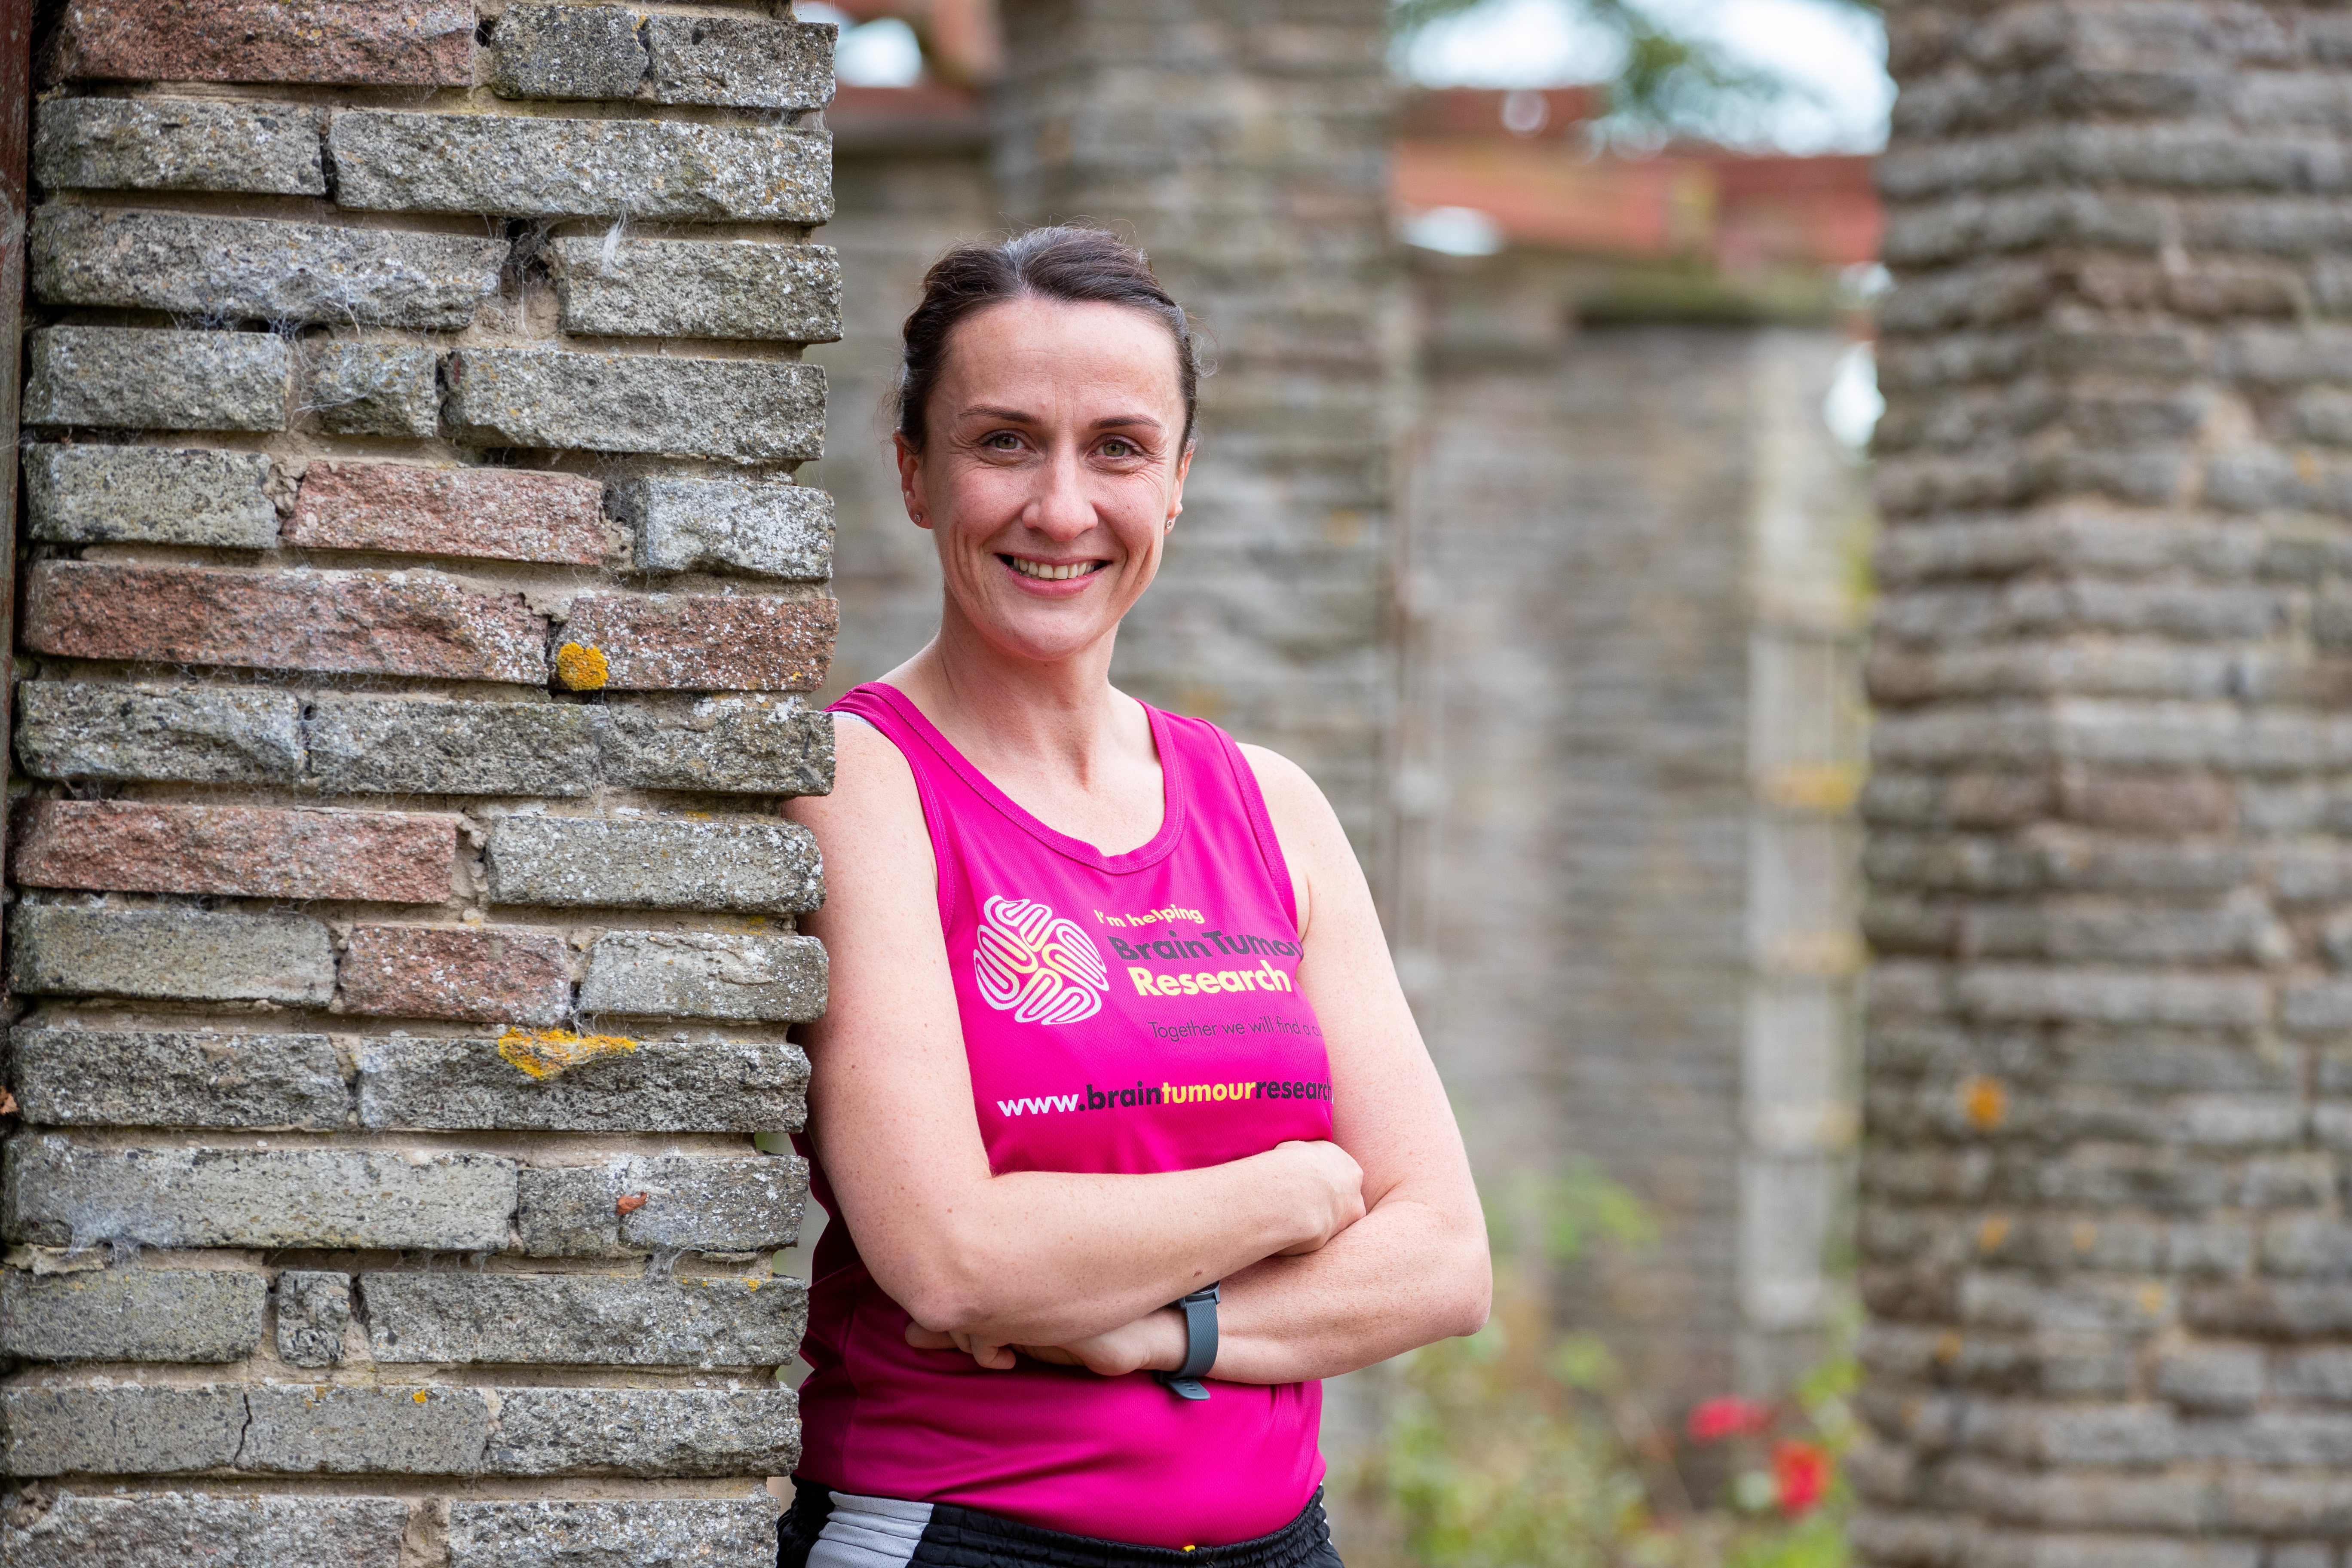 Police officer Kellyanne Muir is running two marathons to raise money to fund a day of research into brain tumours, having seen first hand the impact. Her mission has inspired fellow police officers and runners across Fife to take part in a virtual running challenge.
CR0014912
Pic Kenny Smith, Kenny Smith Photography
Tel 07809 450119